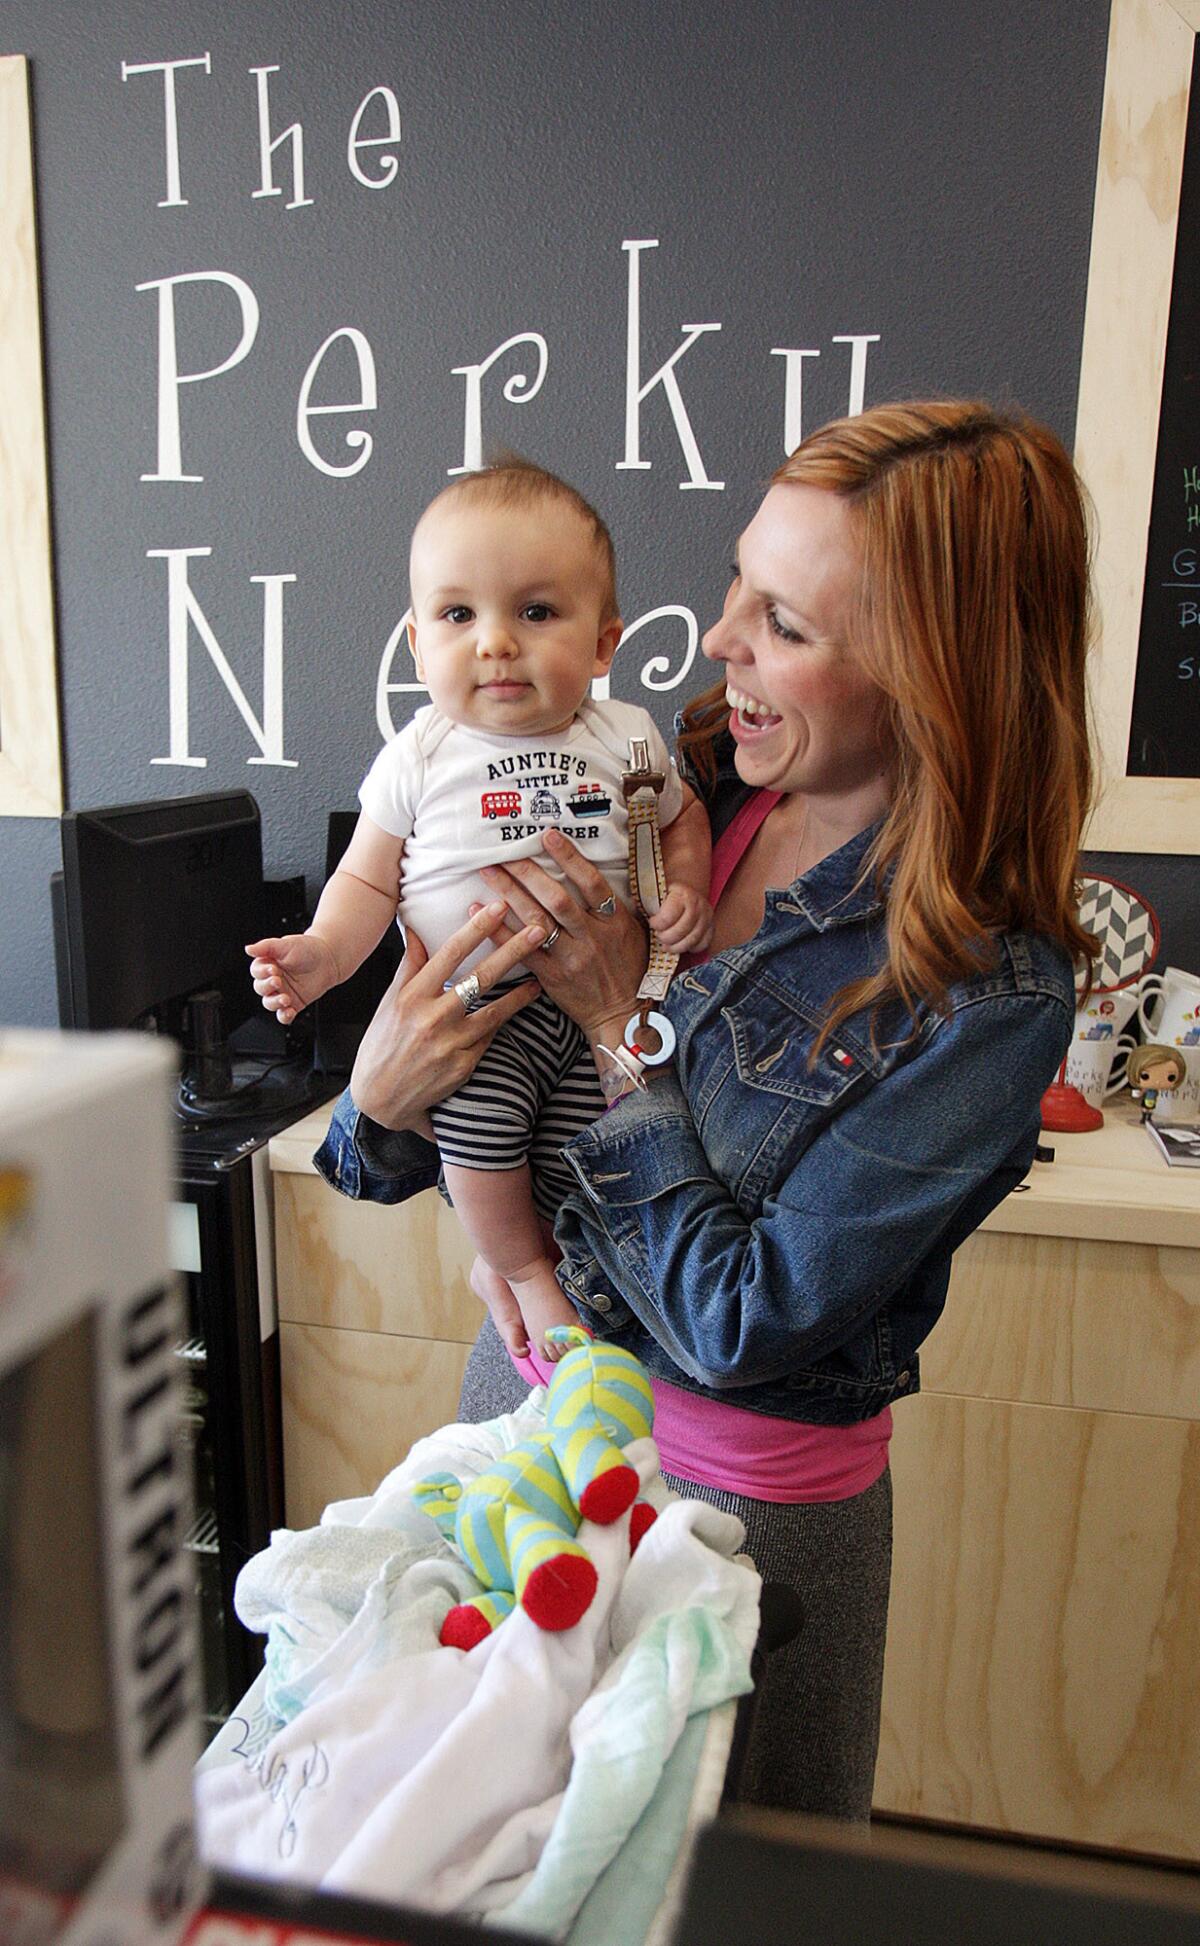 Store owner Tiffany Melius with her 8-month-old son Jack at The Perky Nerd, a 5-day old comic book and coffee store in Burbank on Thursday, April 28, 2016.